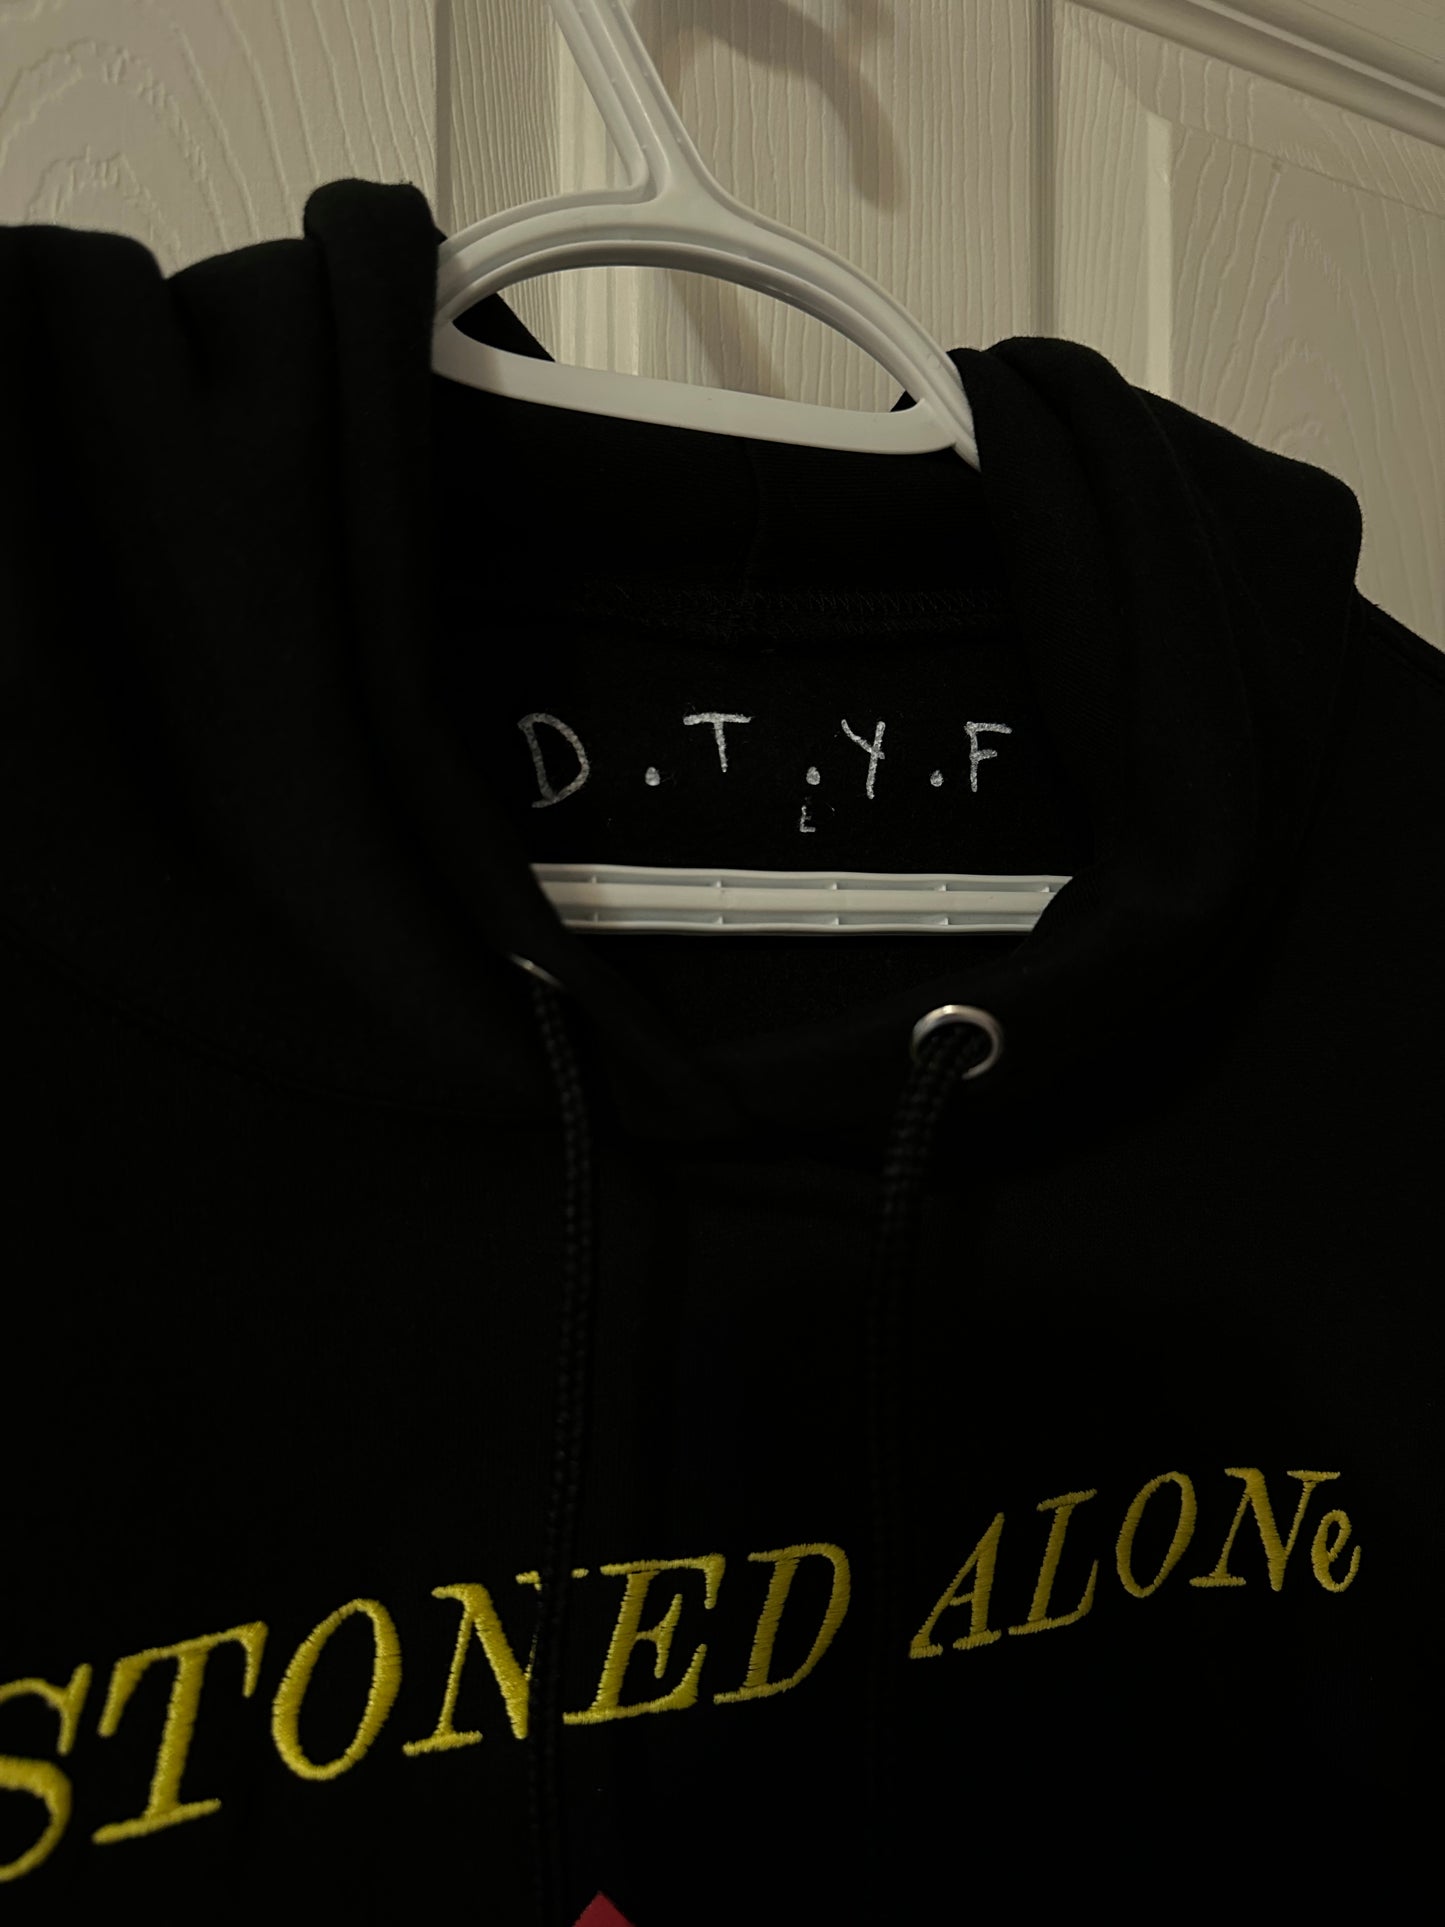 STONED ALONe hoodie